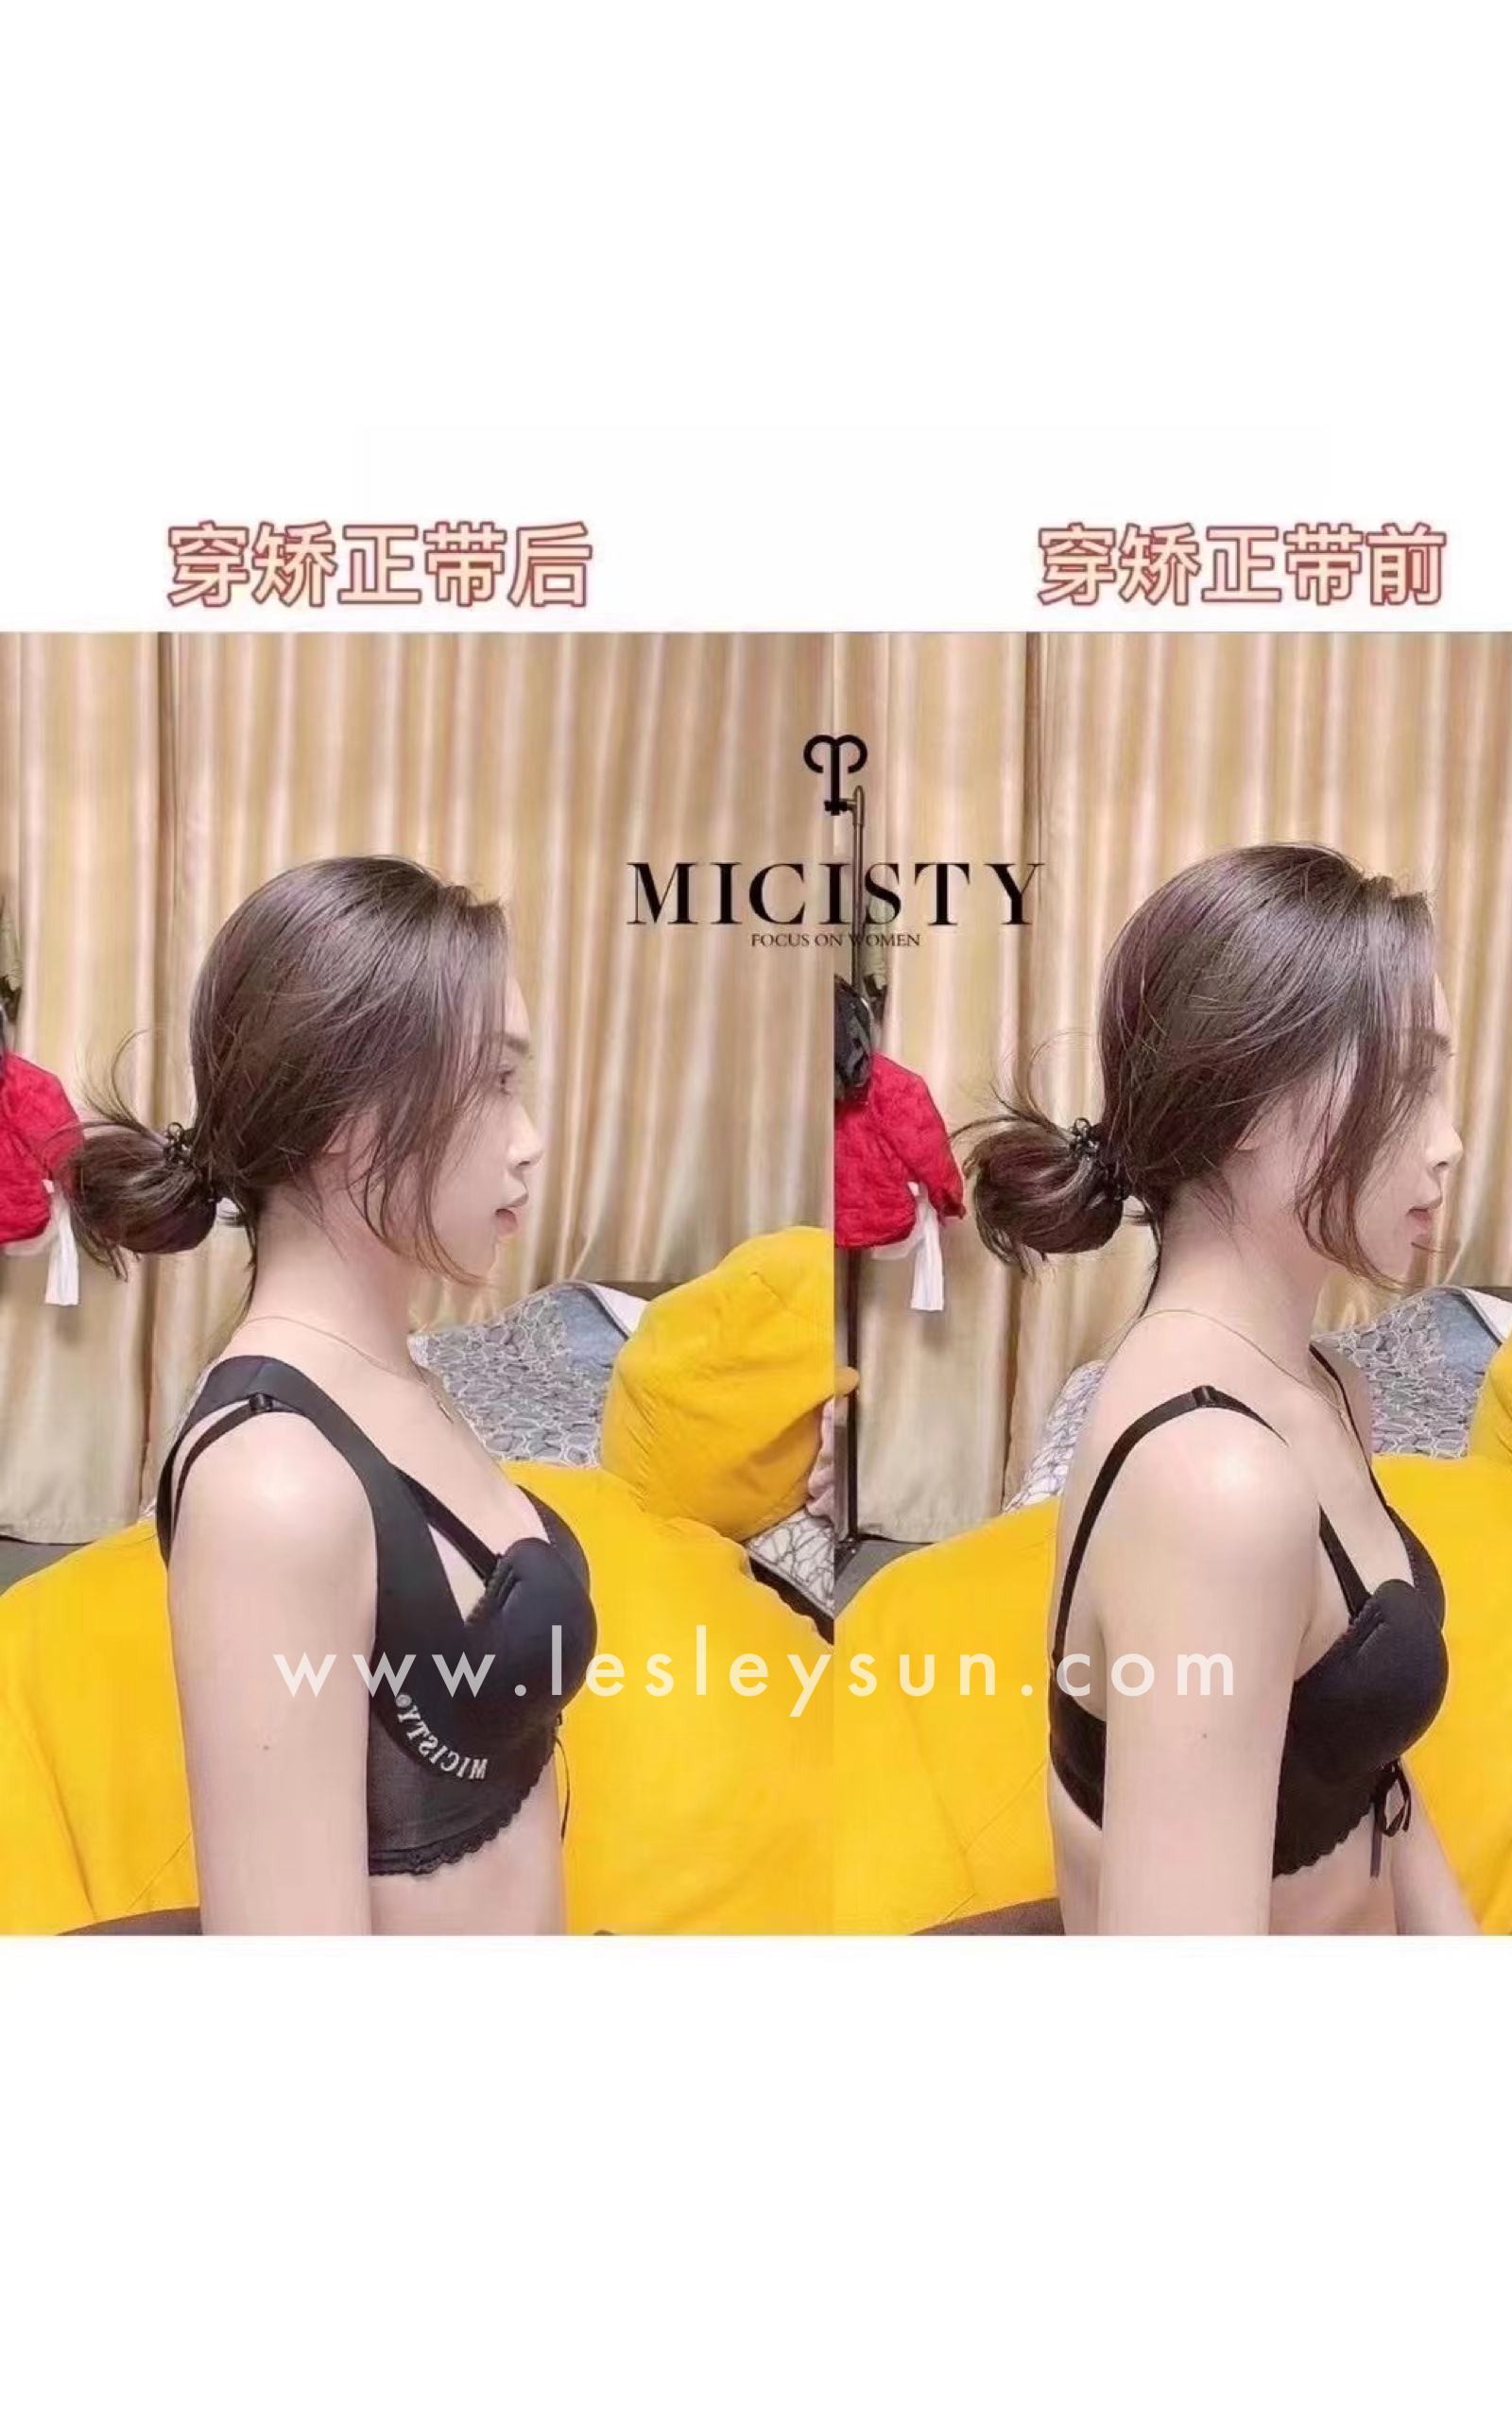 Authentic Micisty Back Support Strap [Due to hygiene concerns, no exchange is permissible]